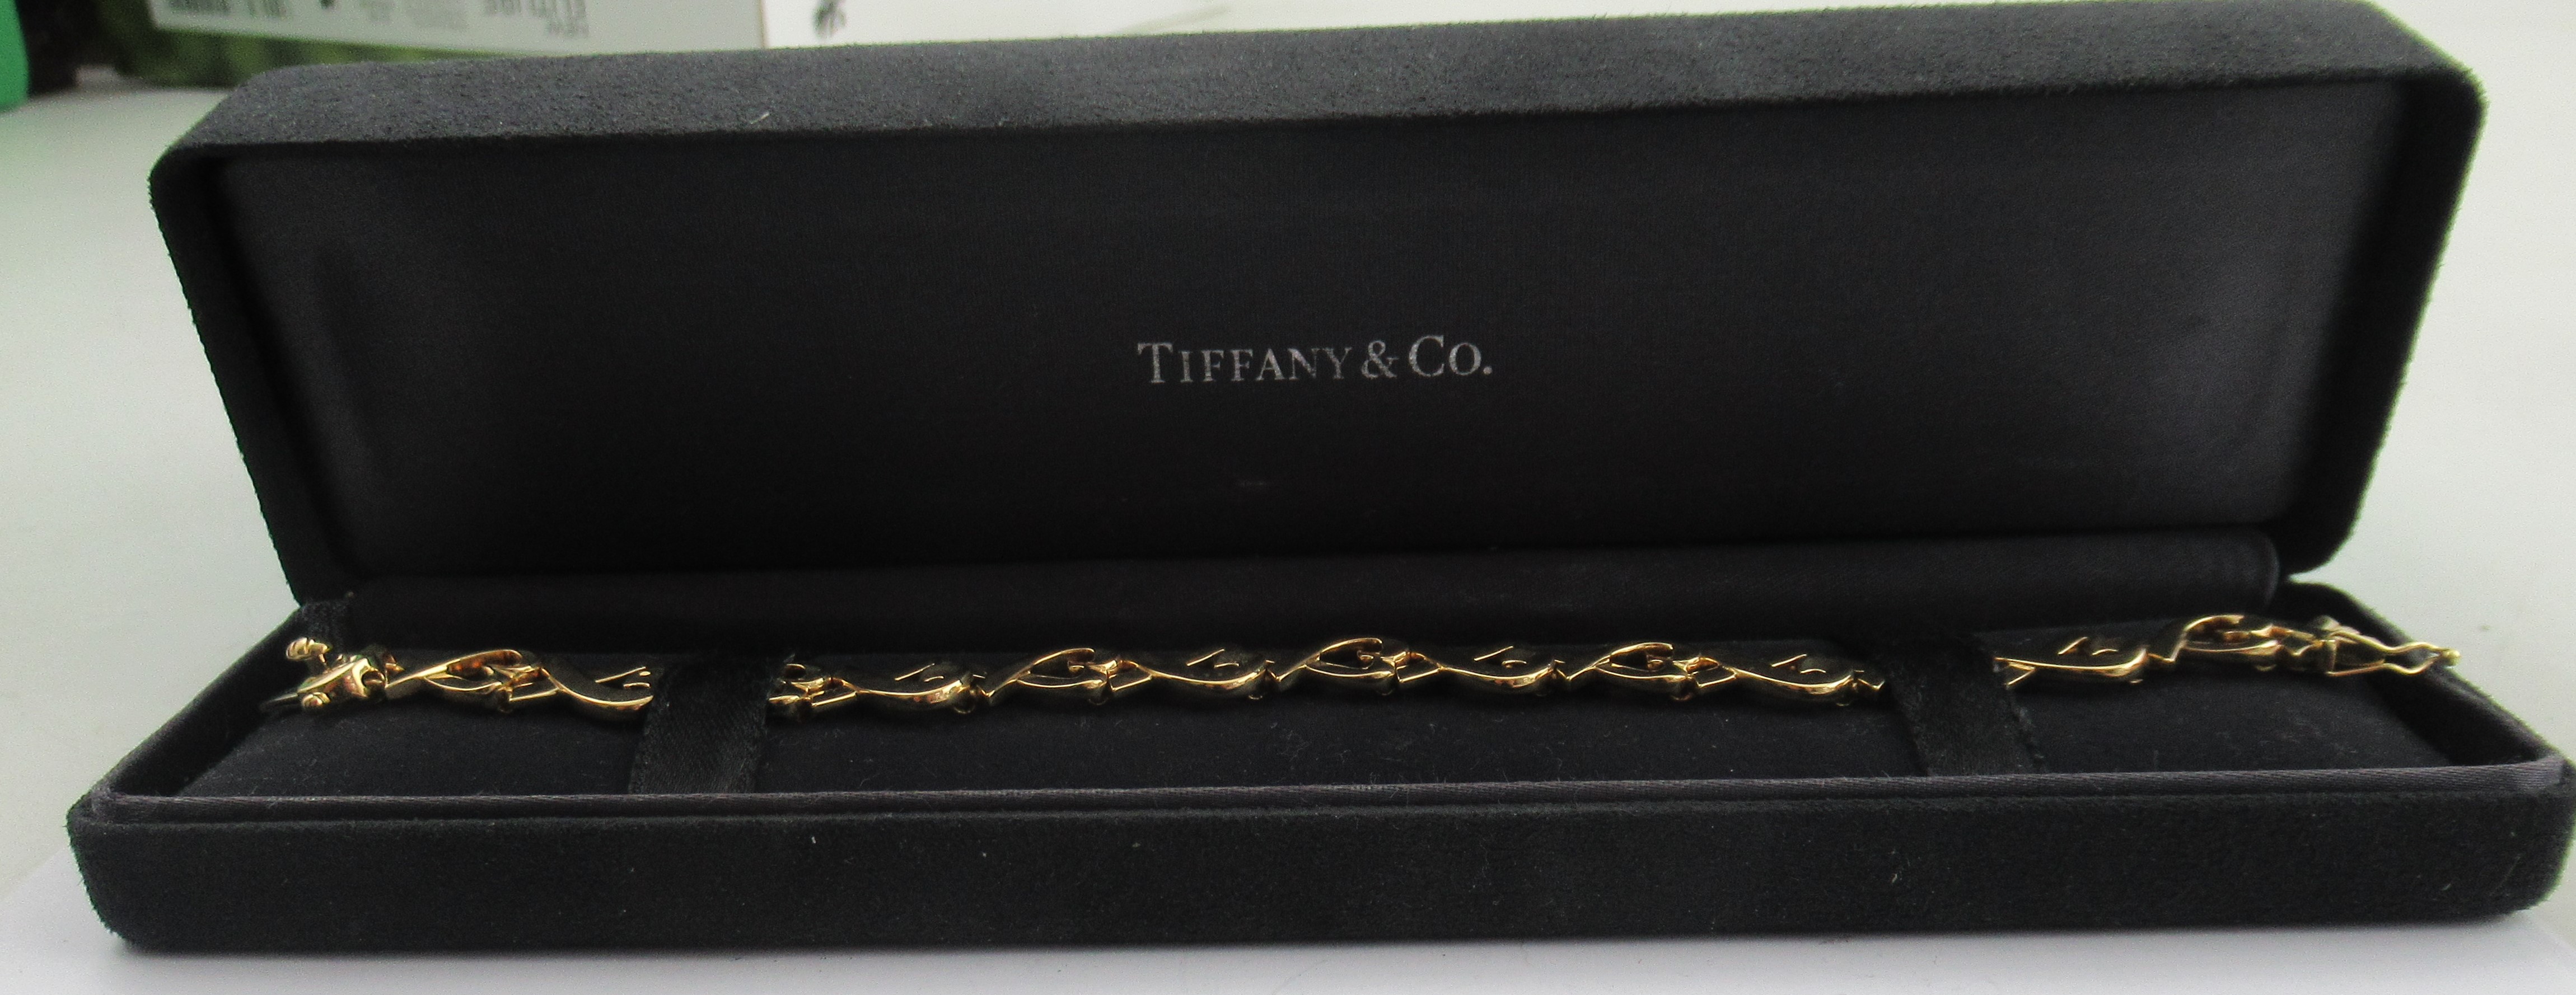 A Tiffany & Co Paloma Picasso18k loving heart link bracelet, weight 31.4g - Image 2 of 4